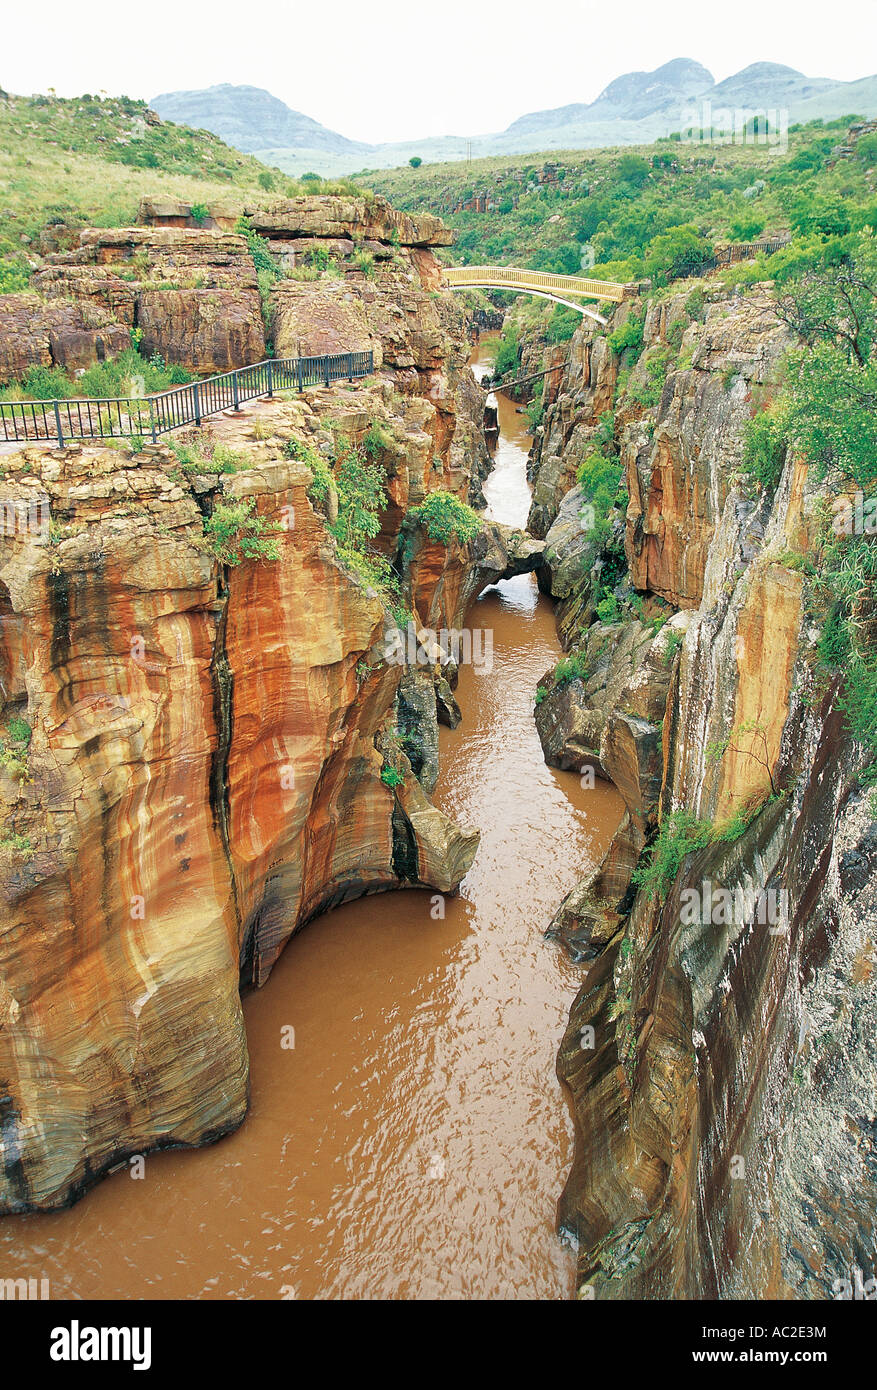 Bourke s Luck Potholes at beginning of Blyderiver Canyon Mpumalanga South Africa Stock Photo